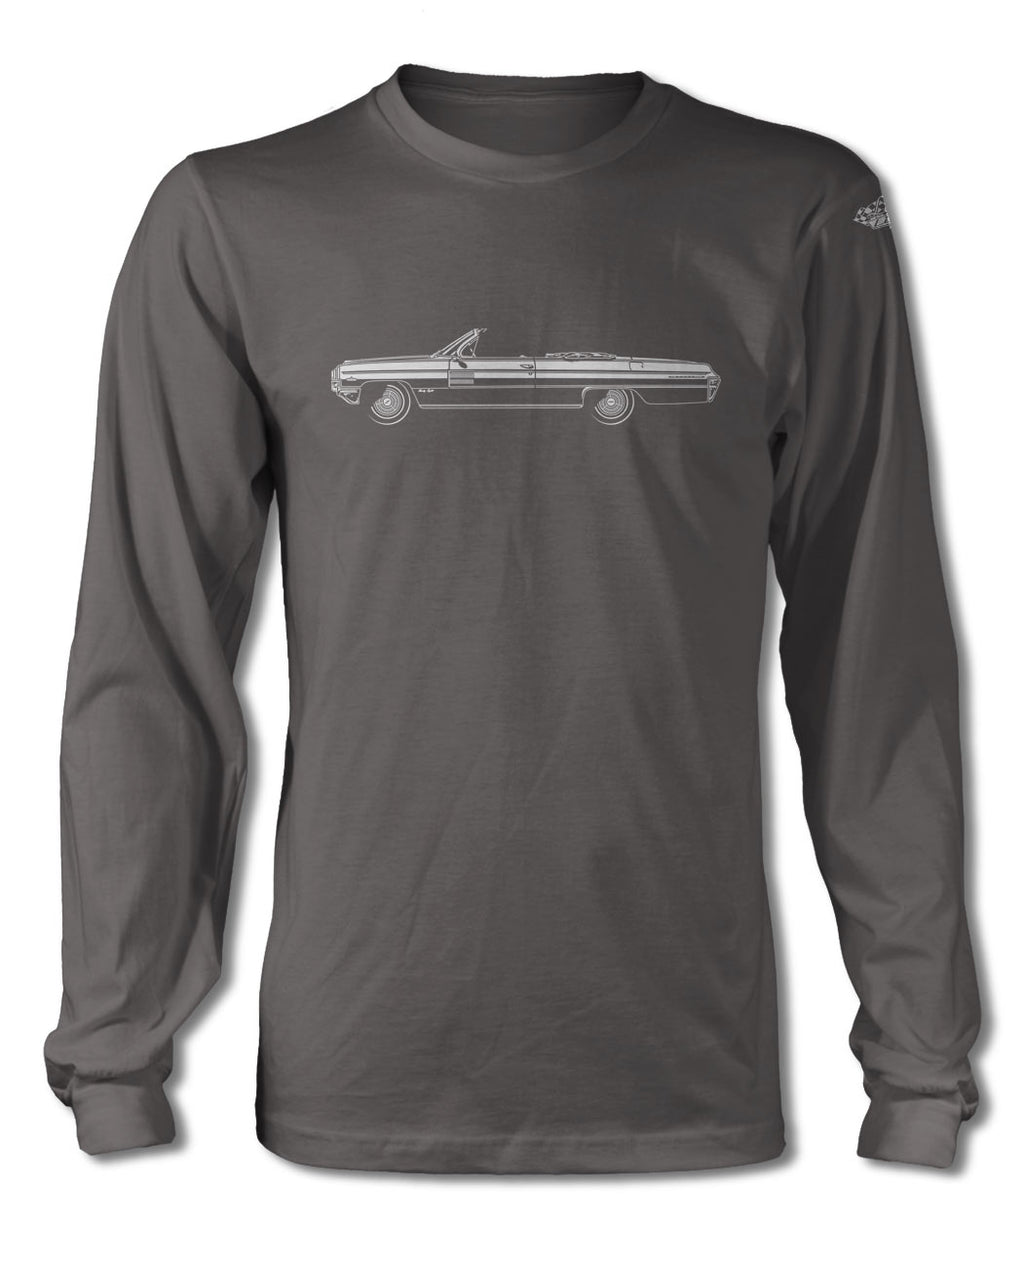 1962 Oldsmobile 98 Starfire Convertible T-Shirt - Long Sleeves - Side View